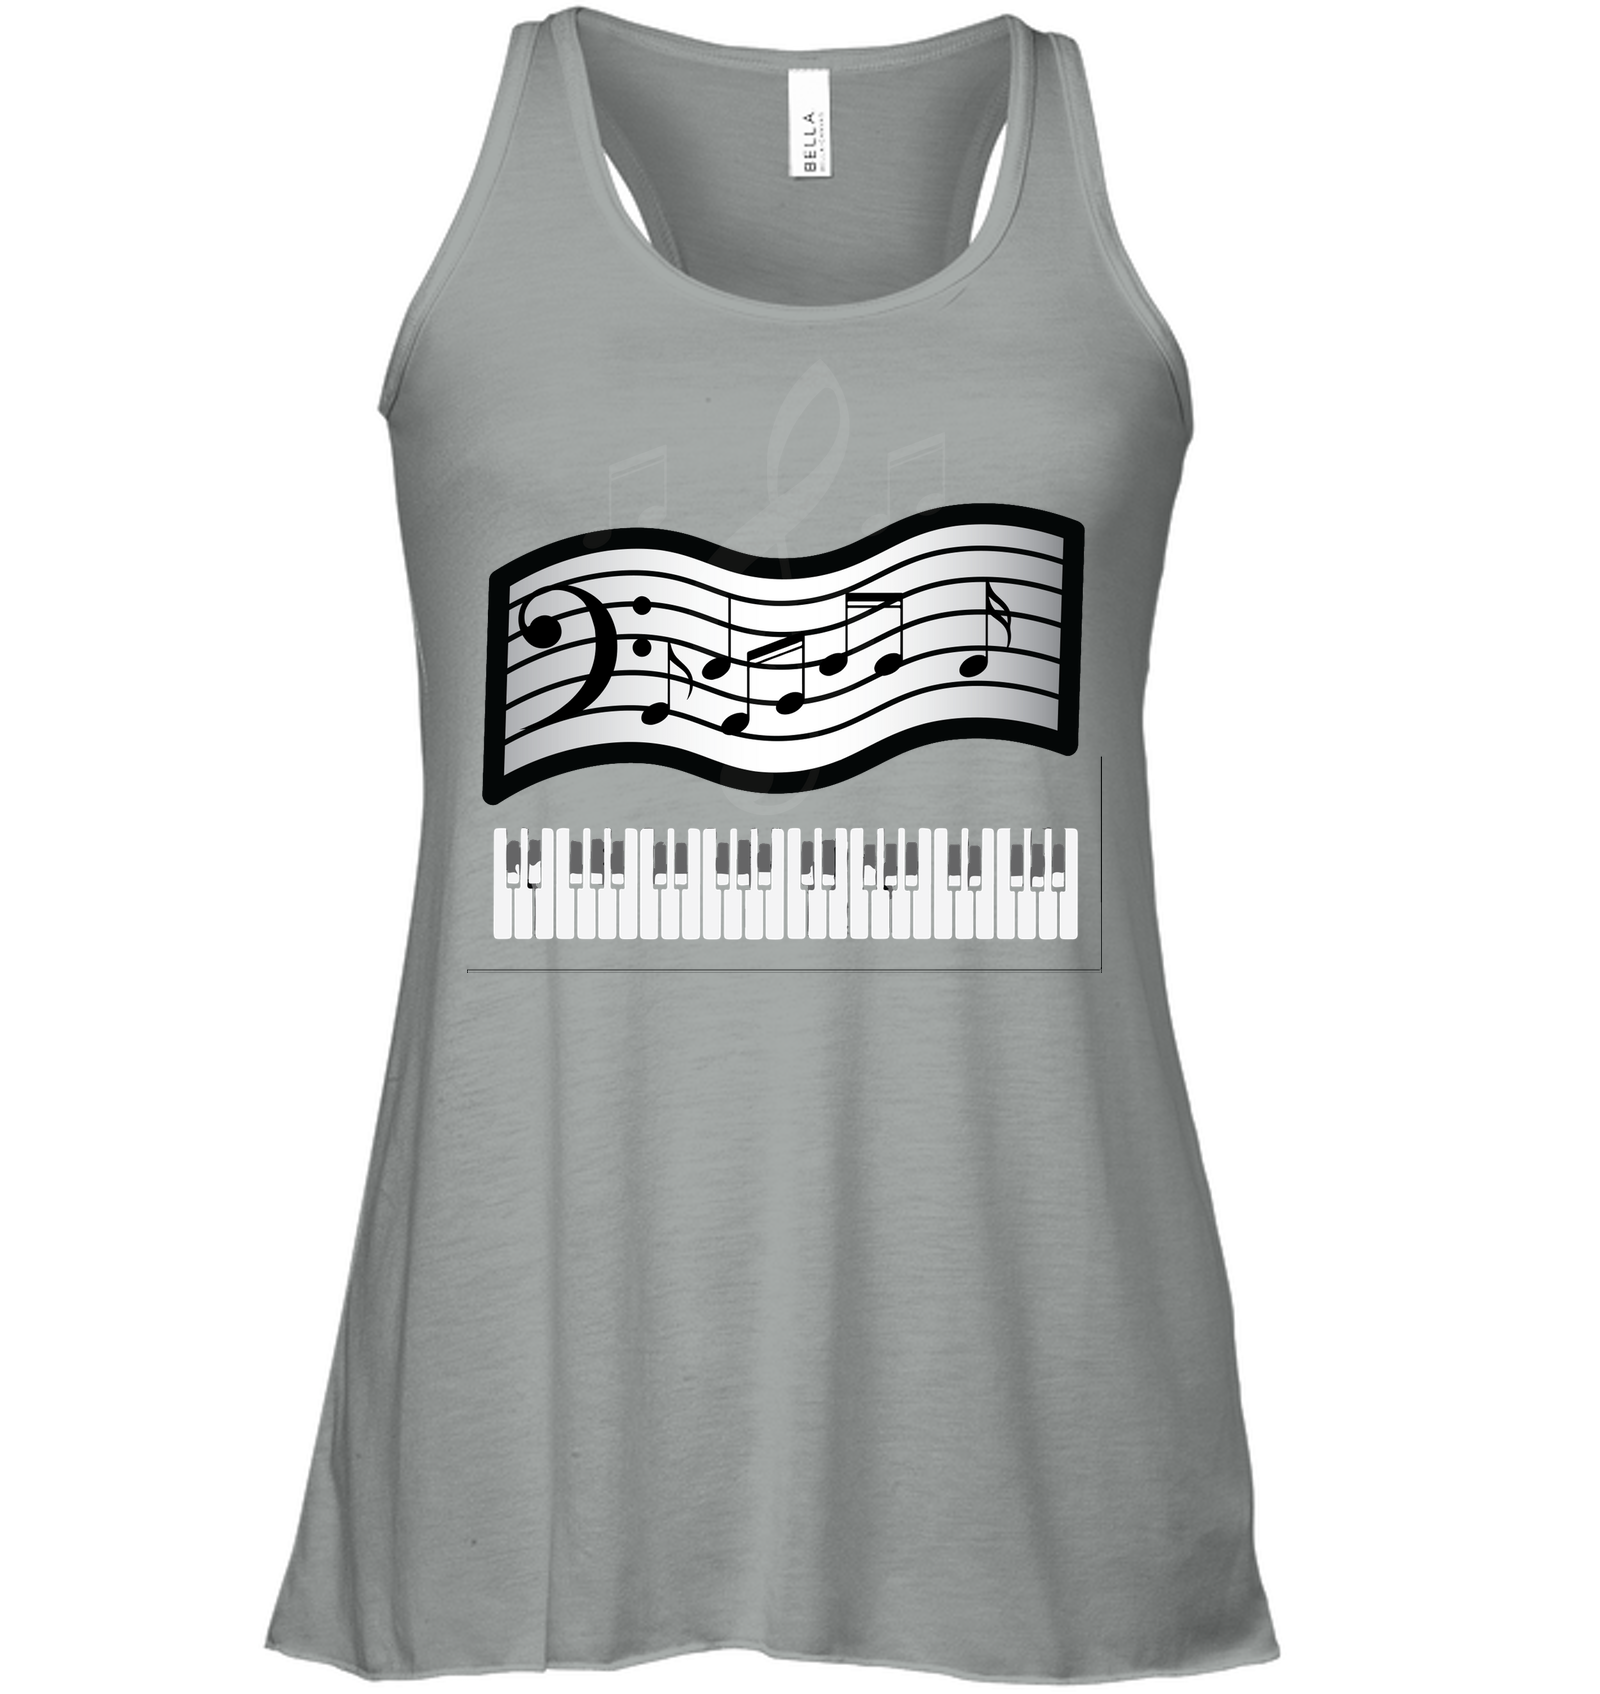 Keyboard and Musical Notes - Bella + Canvas Women's Flowy Racerback Tank